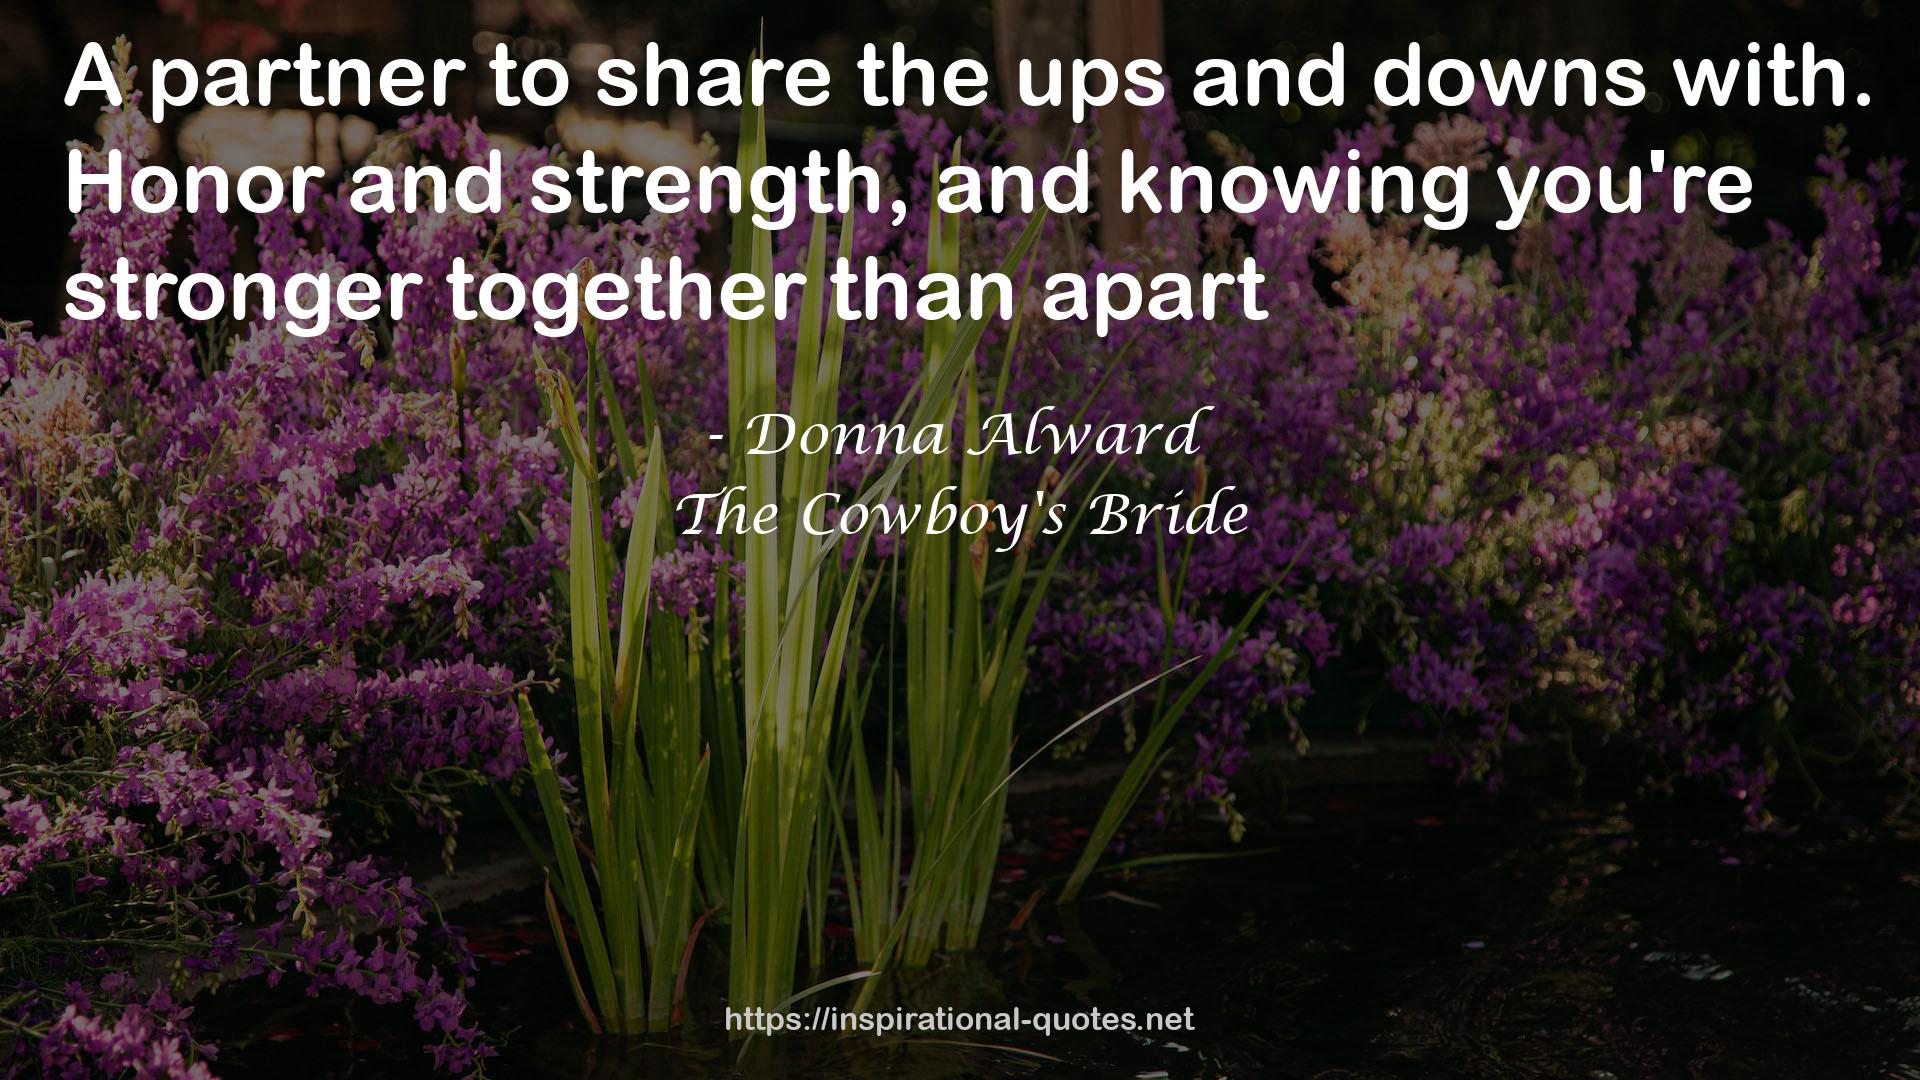 Donna Alward QUOTES